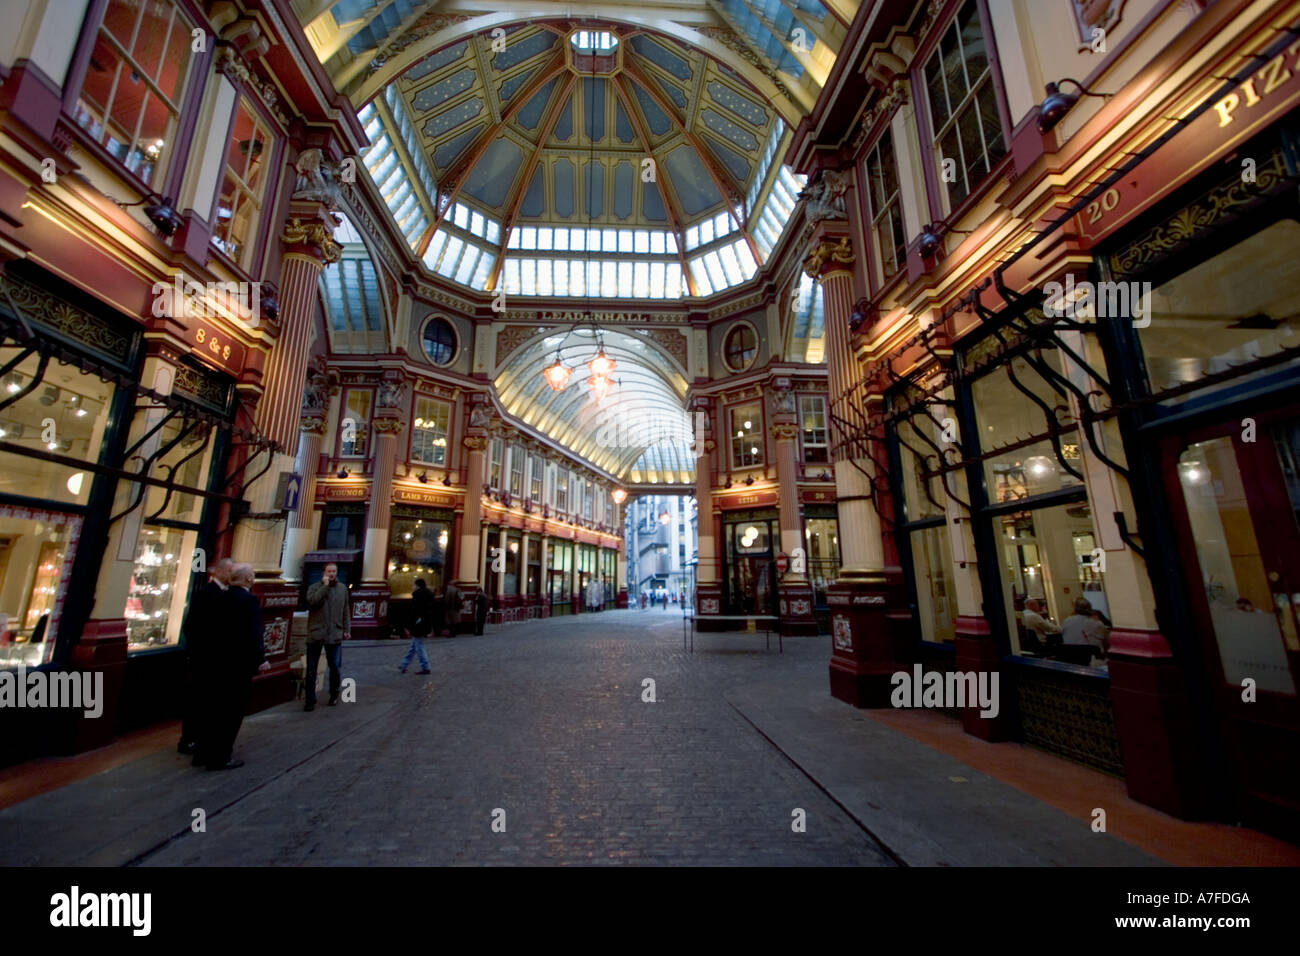 Leadenhall Market City of London this historic wrought iron structure ...